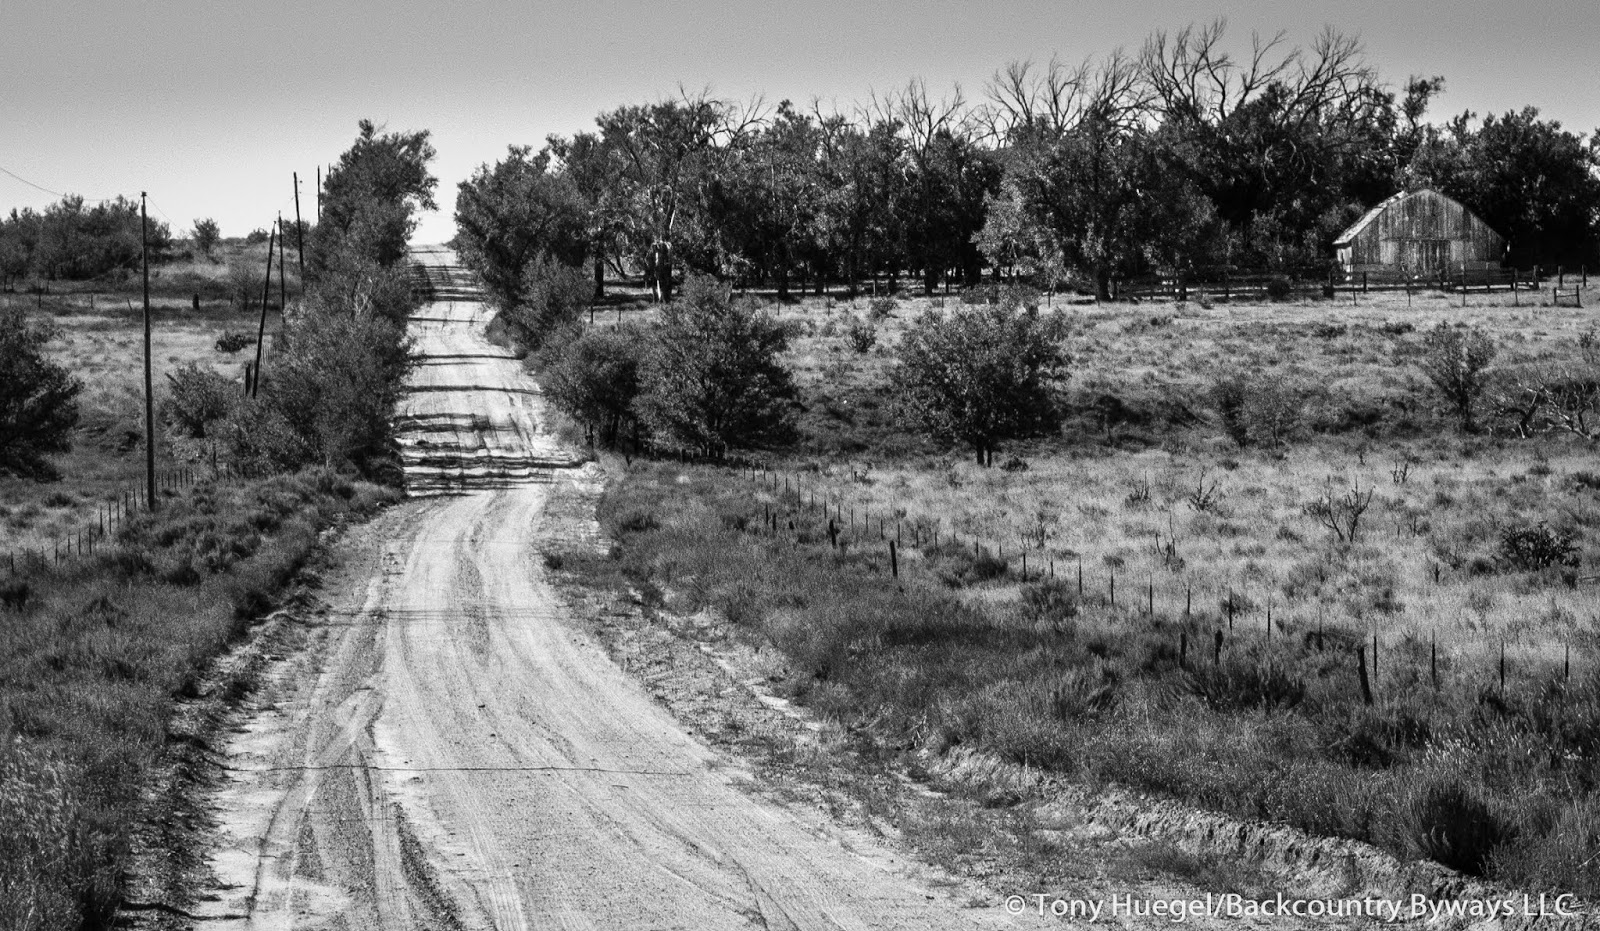 Backcountry Byways Llc More Than 80 Years Later A Byways Journey Reveals Remnants Of 30s Dust Bowl Country